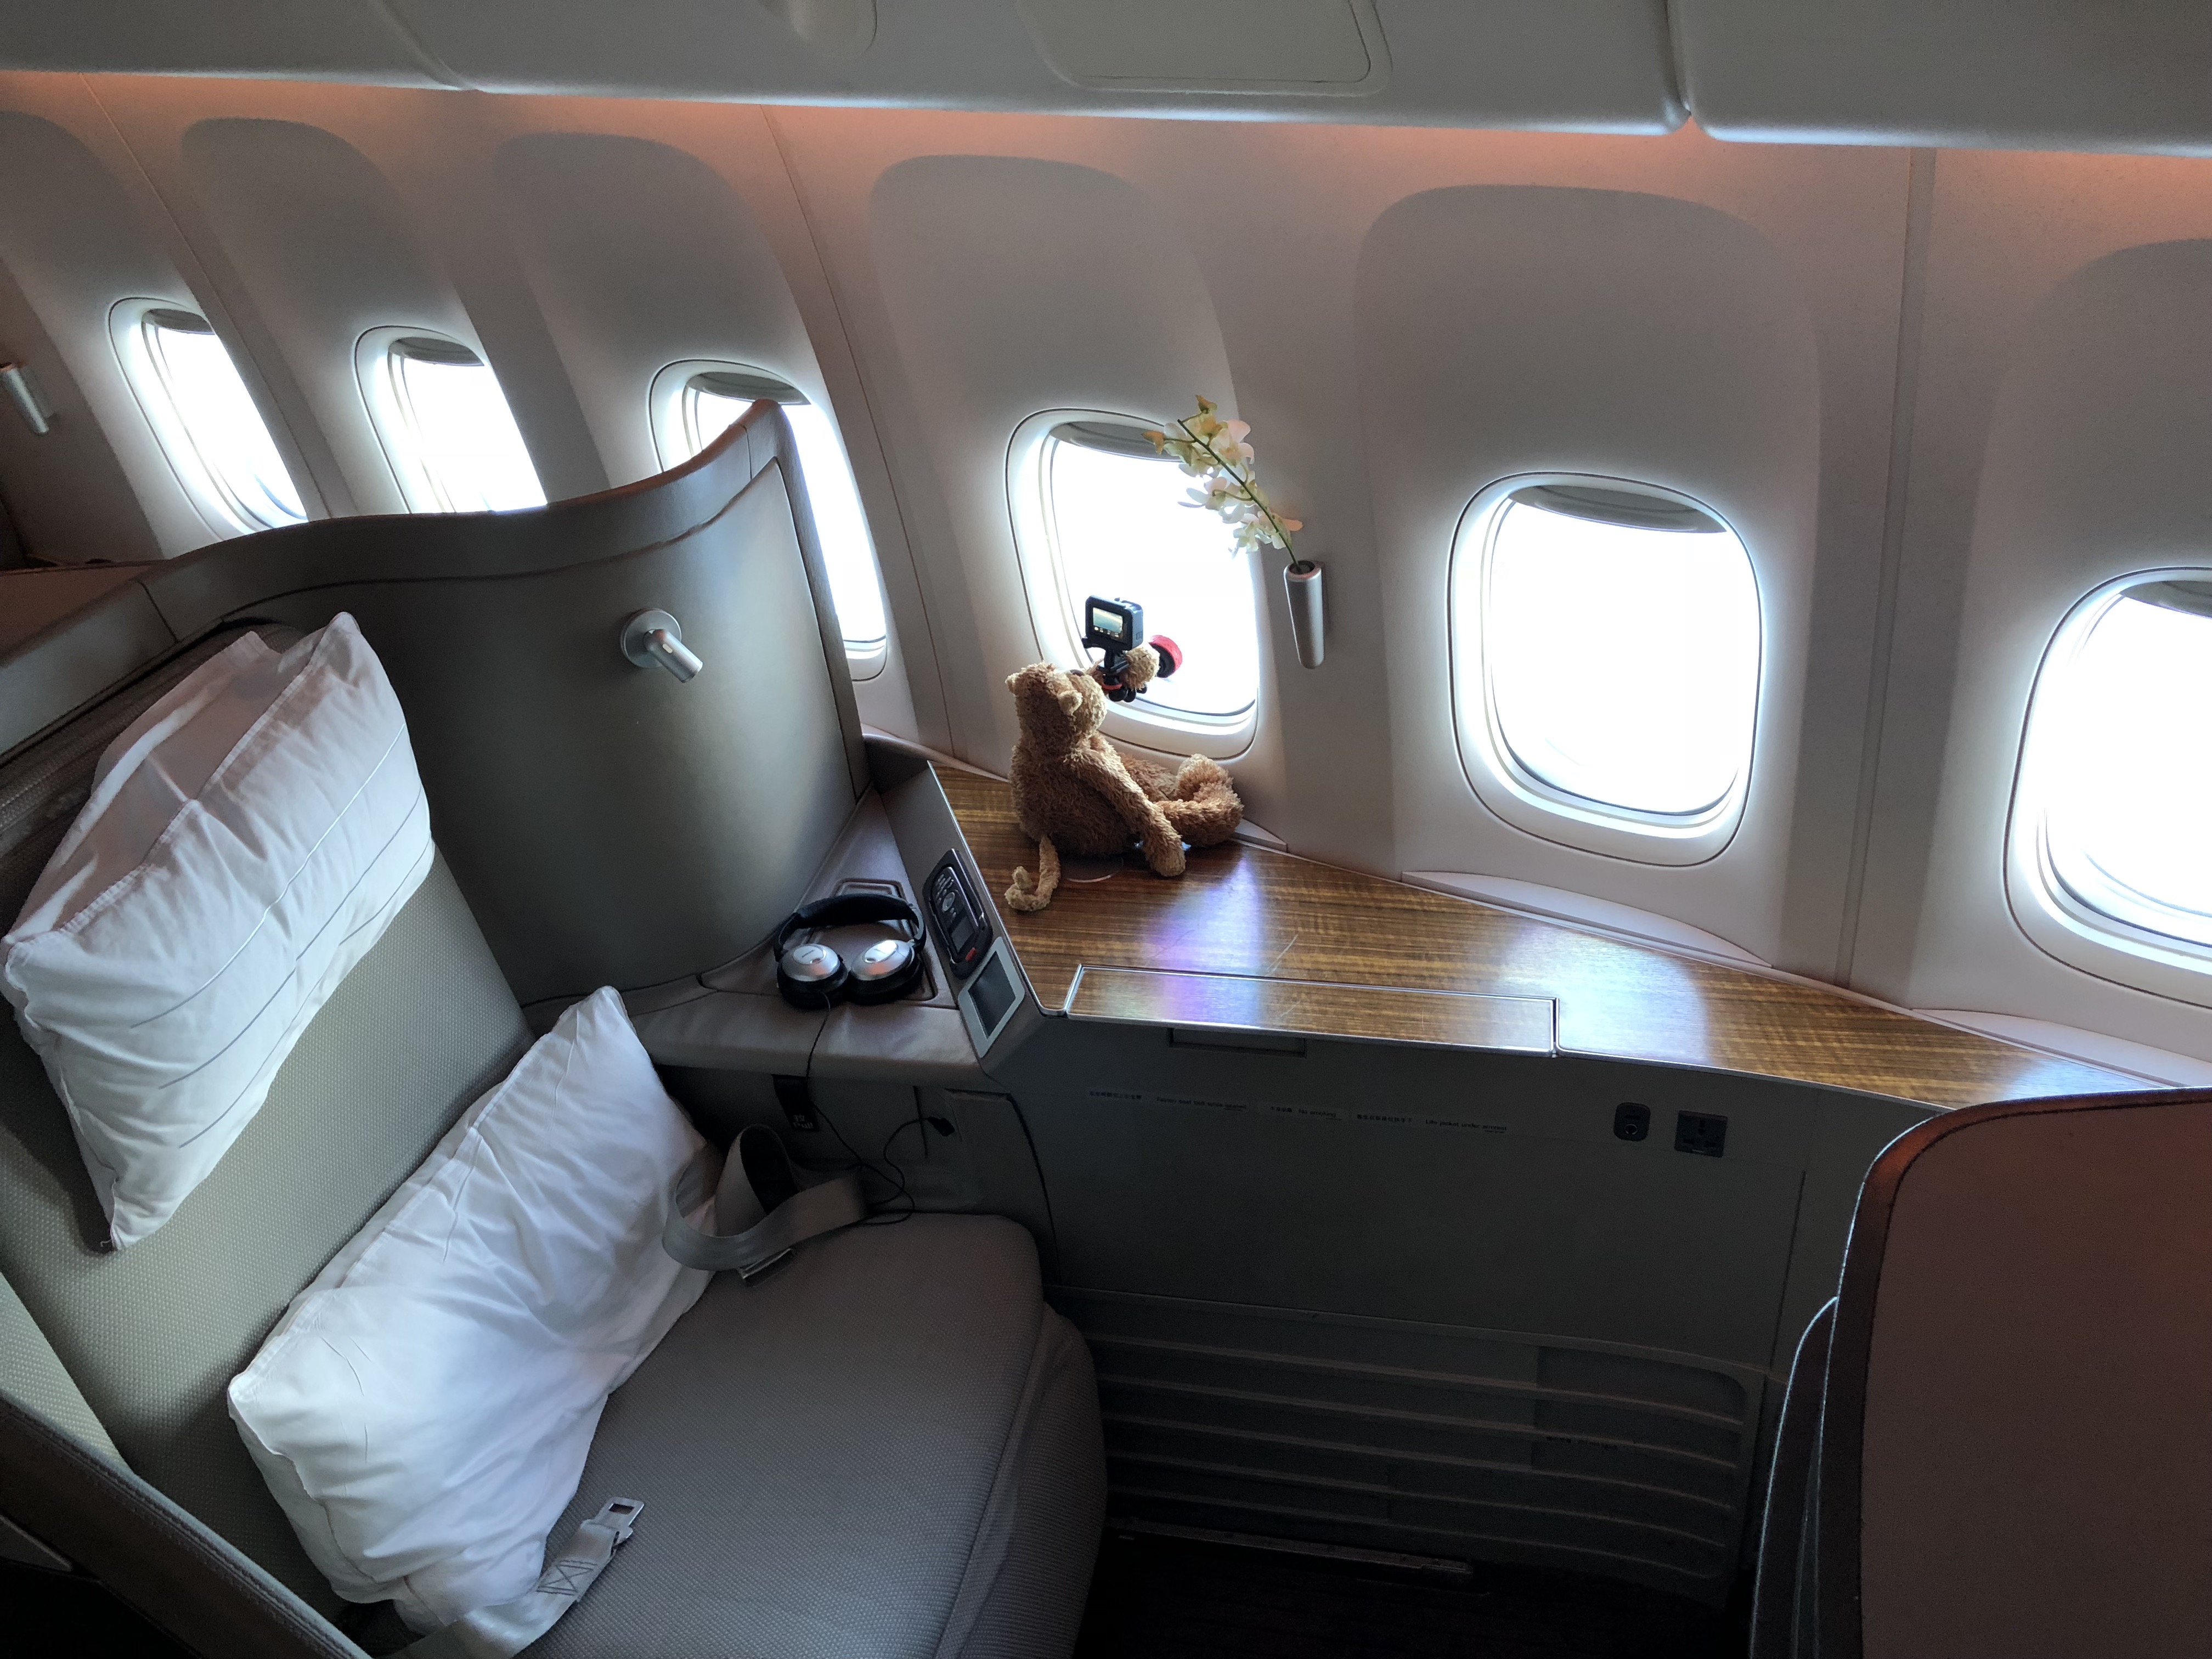 a stuffed animal on a table in an airplane